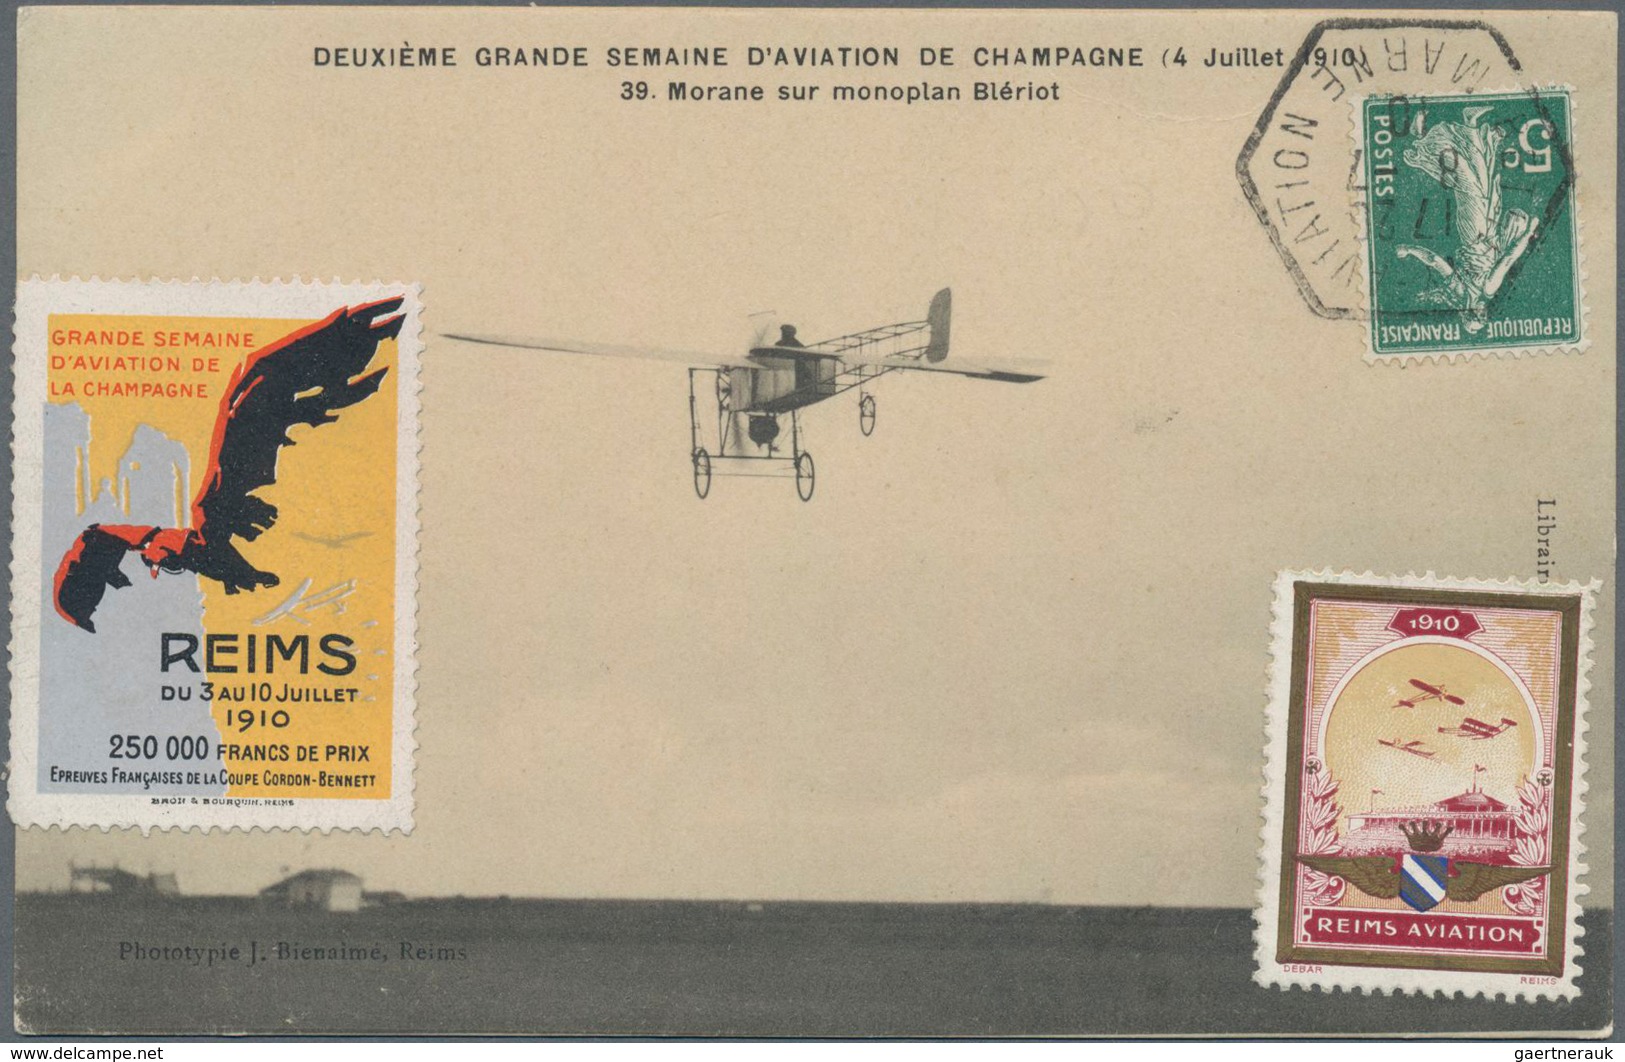 Frankreich: 1910/1939, Airmail, lot of seven covers/cards, showing flight cachets, airmail frankings